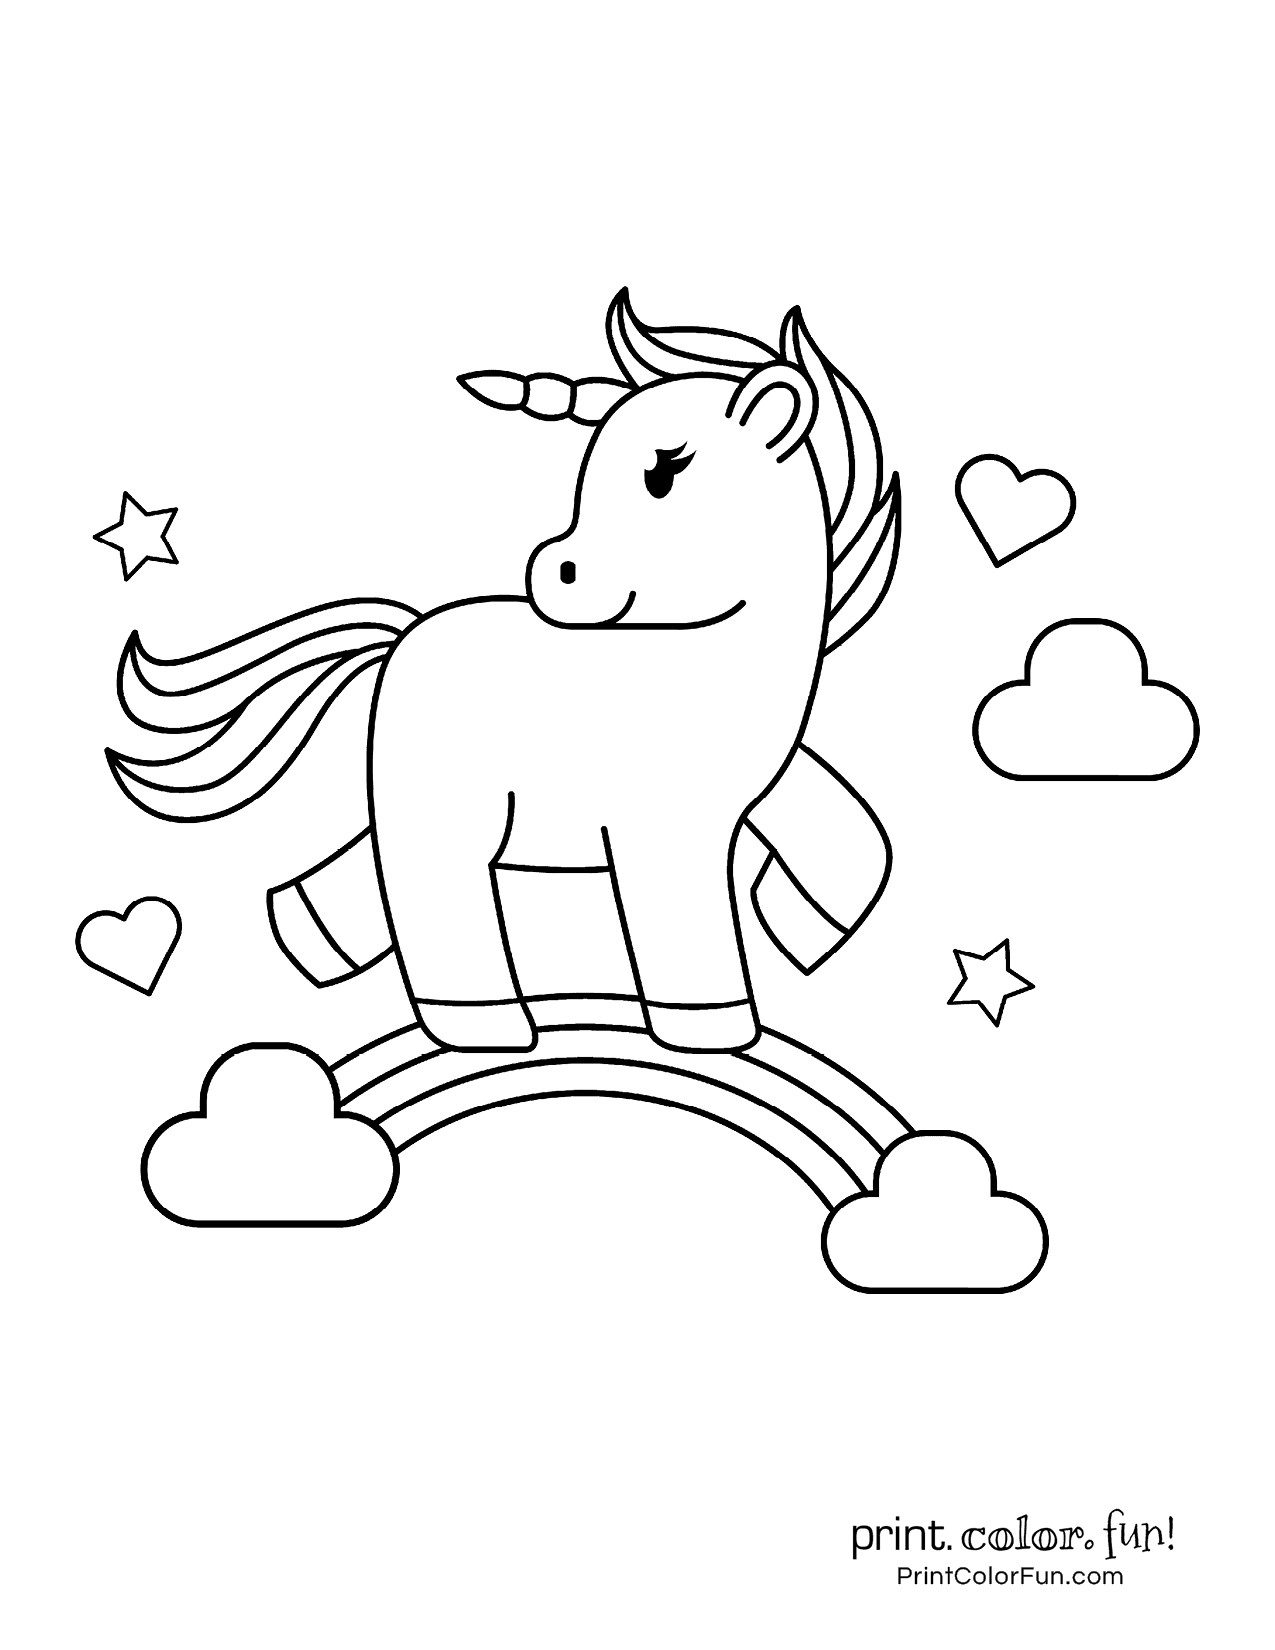 Unicorn Coloring Pages Printable
 FREE BABY BINGO TEMPLATE PRINTABLE BLANK Auto Electrical